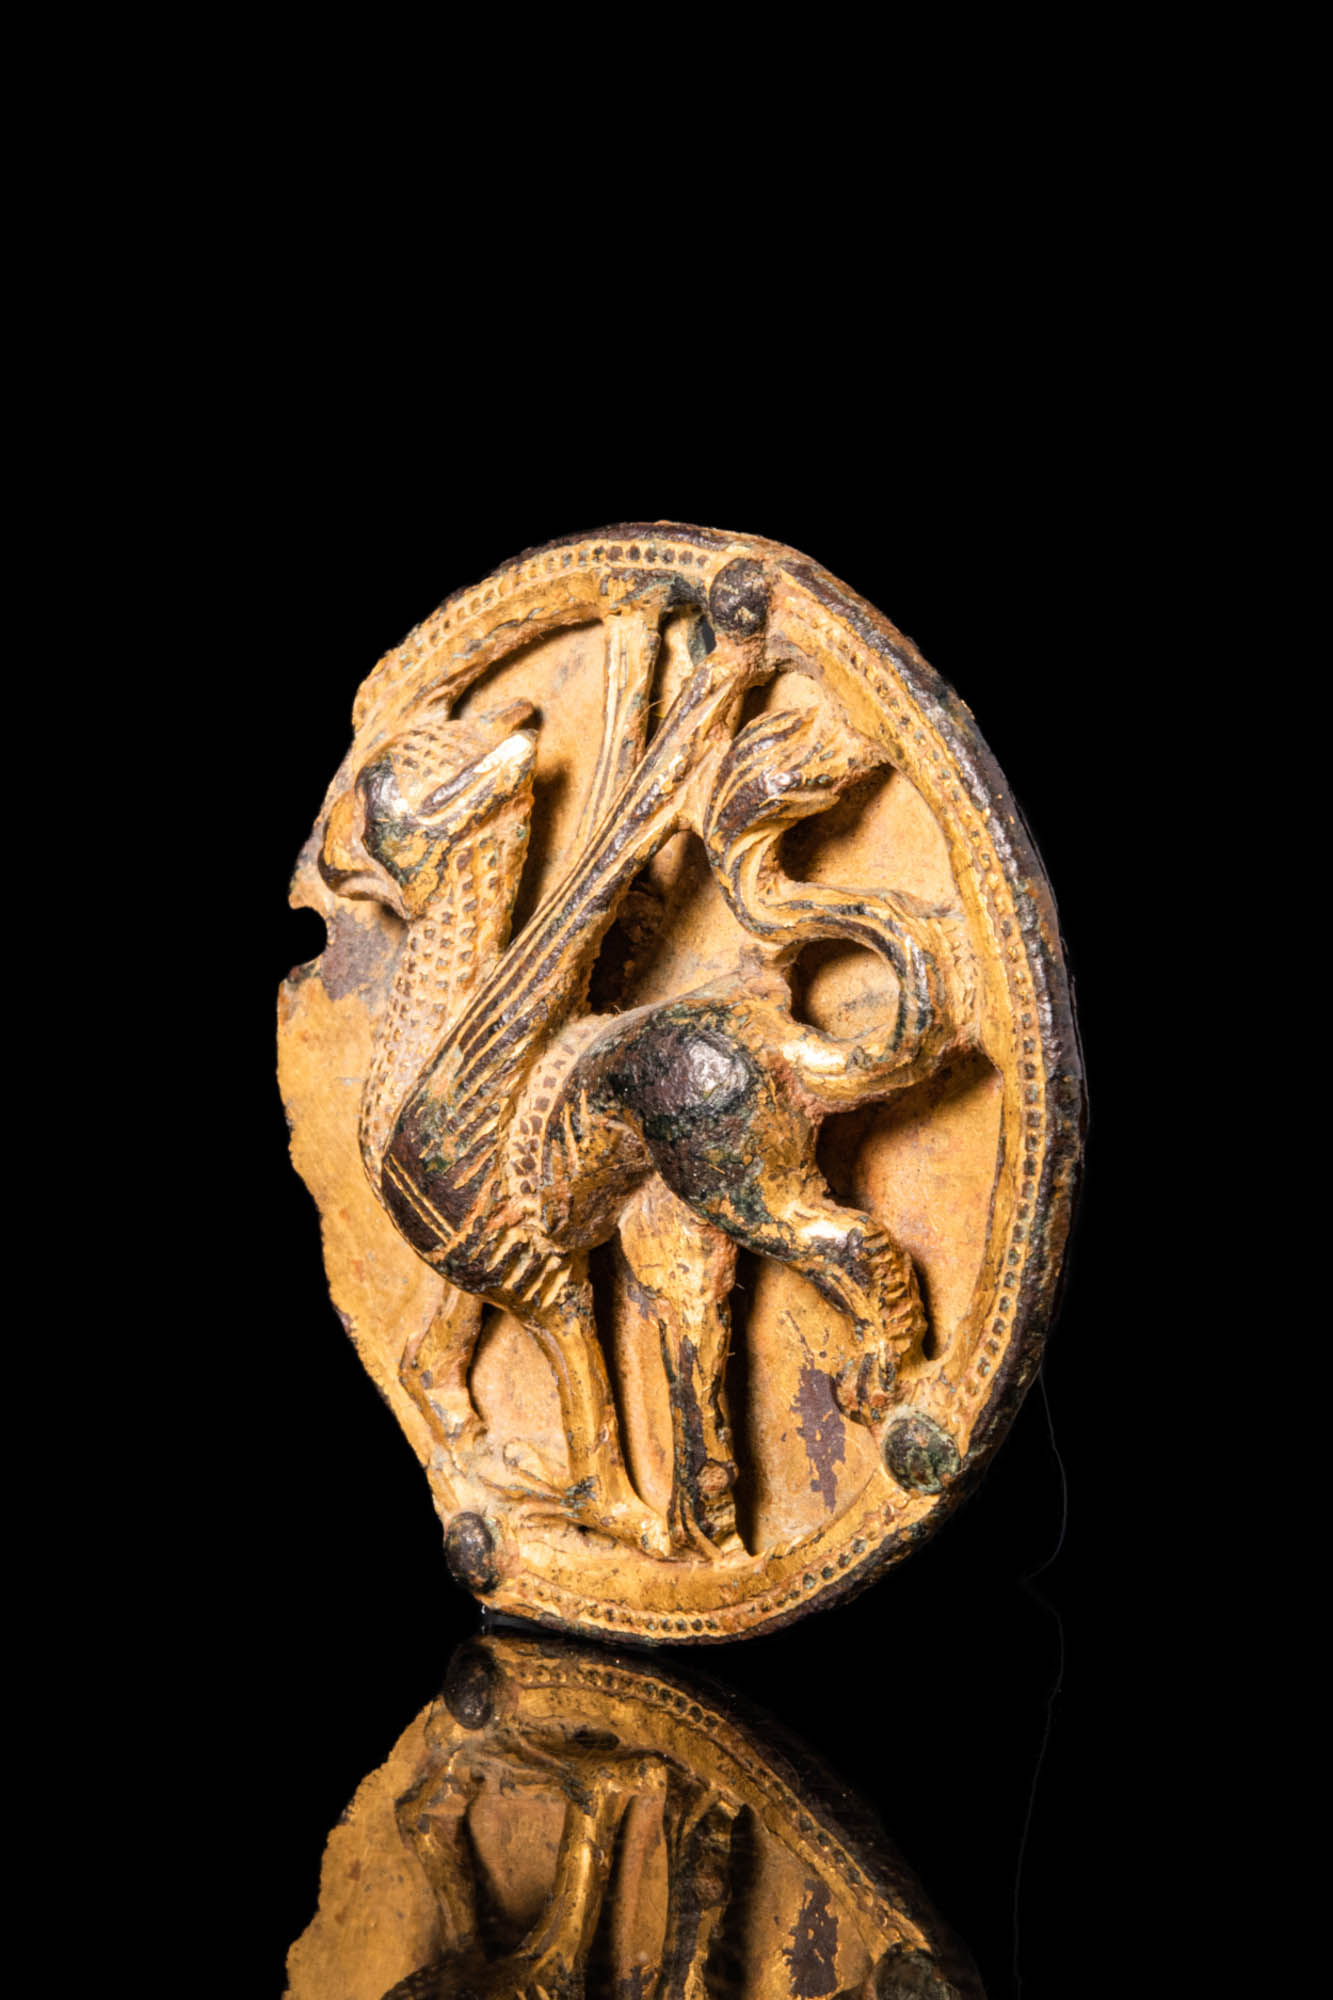 SCYTHIAN GILDED MEDALLION DEPICTING A GRIFFIN WITH INLAID EYES - Image 2 of 3